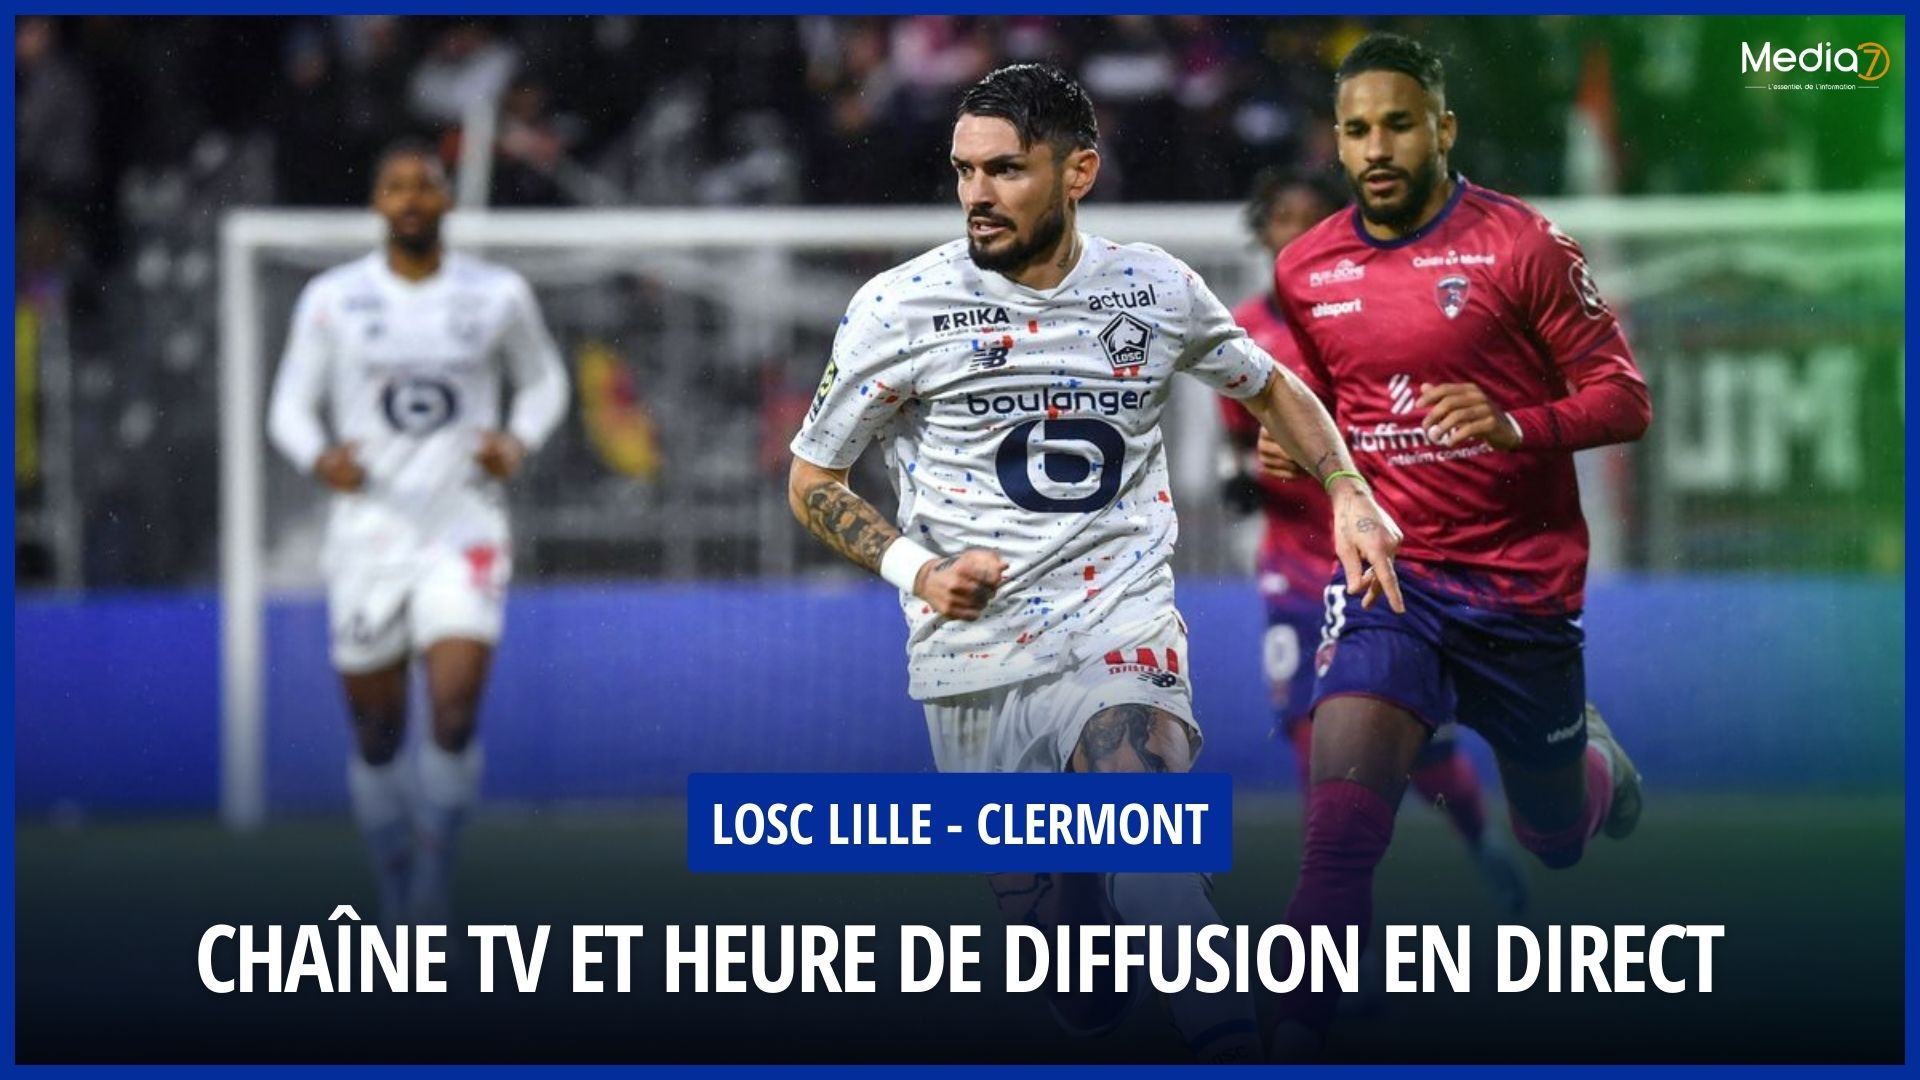 Broadcast of the LOSC Lille - Clermont Match live: TV & Streaming Channel - Media7